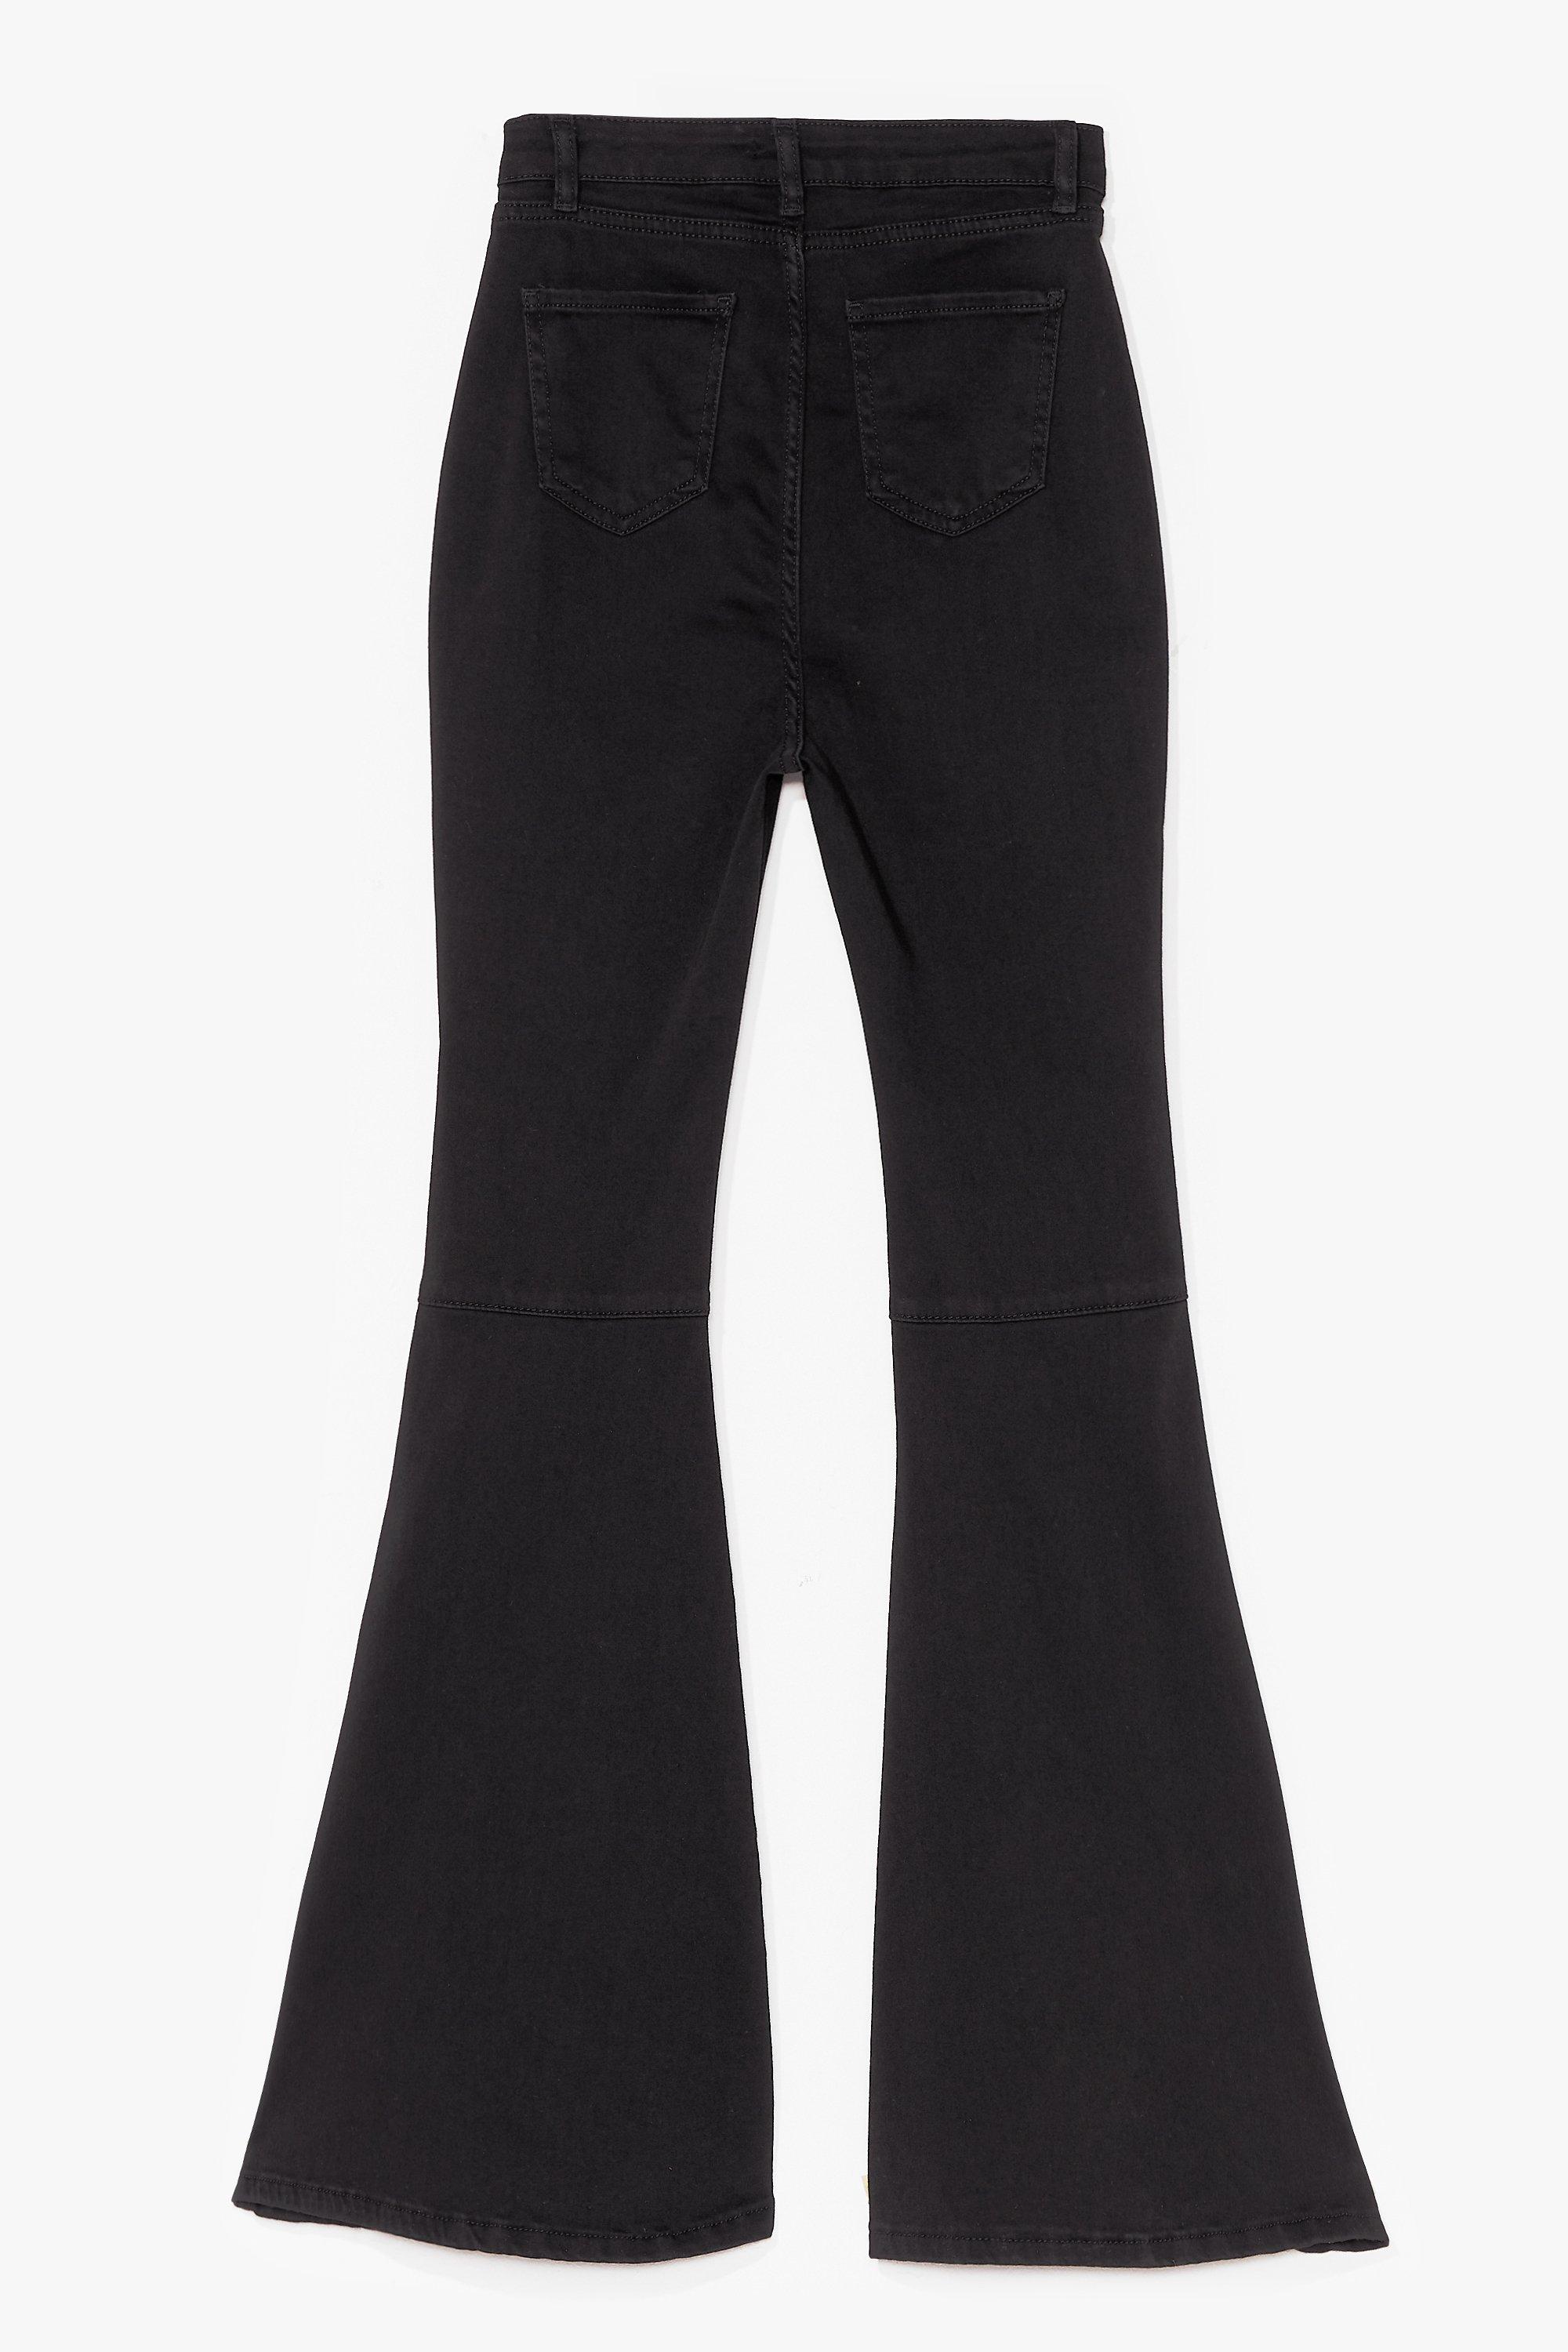 Super Trouper High-Waisted Flare Jeans